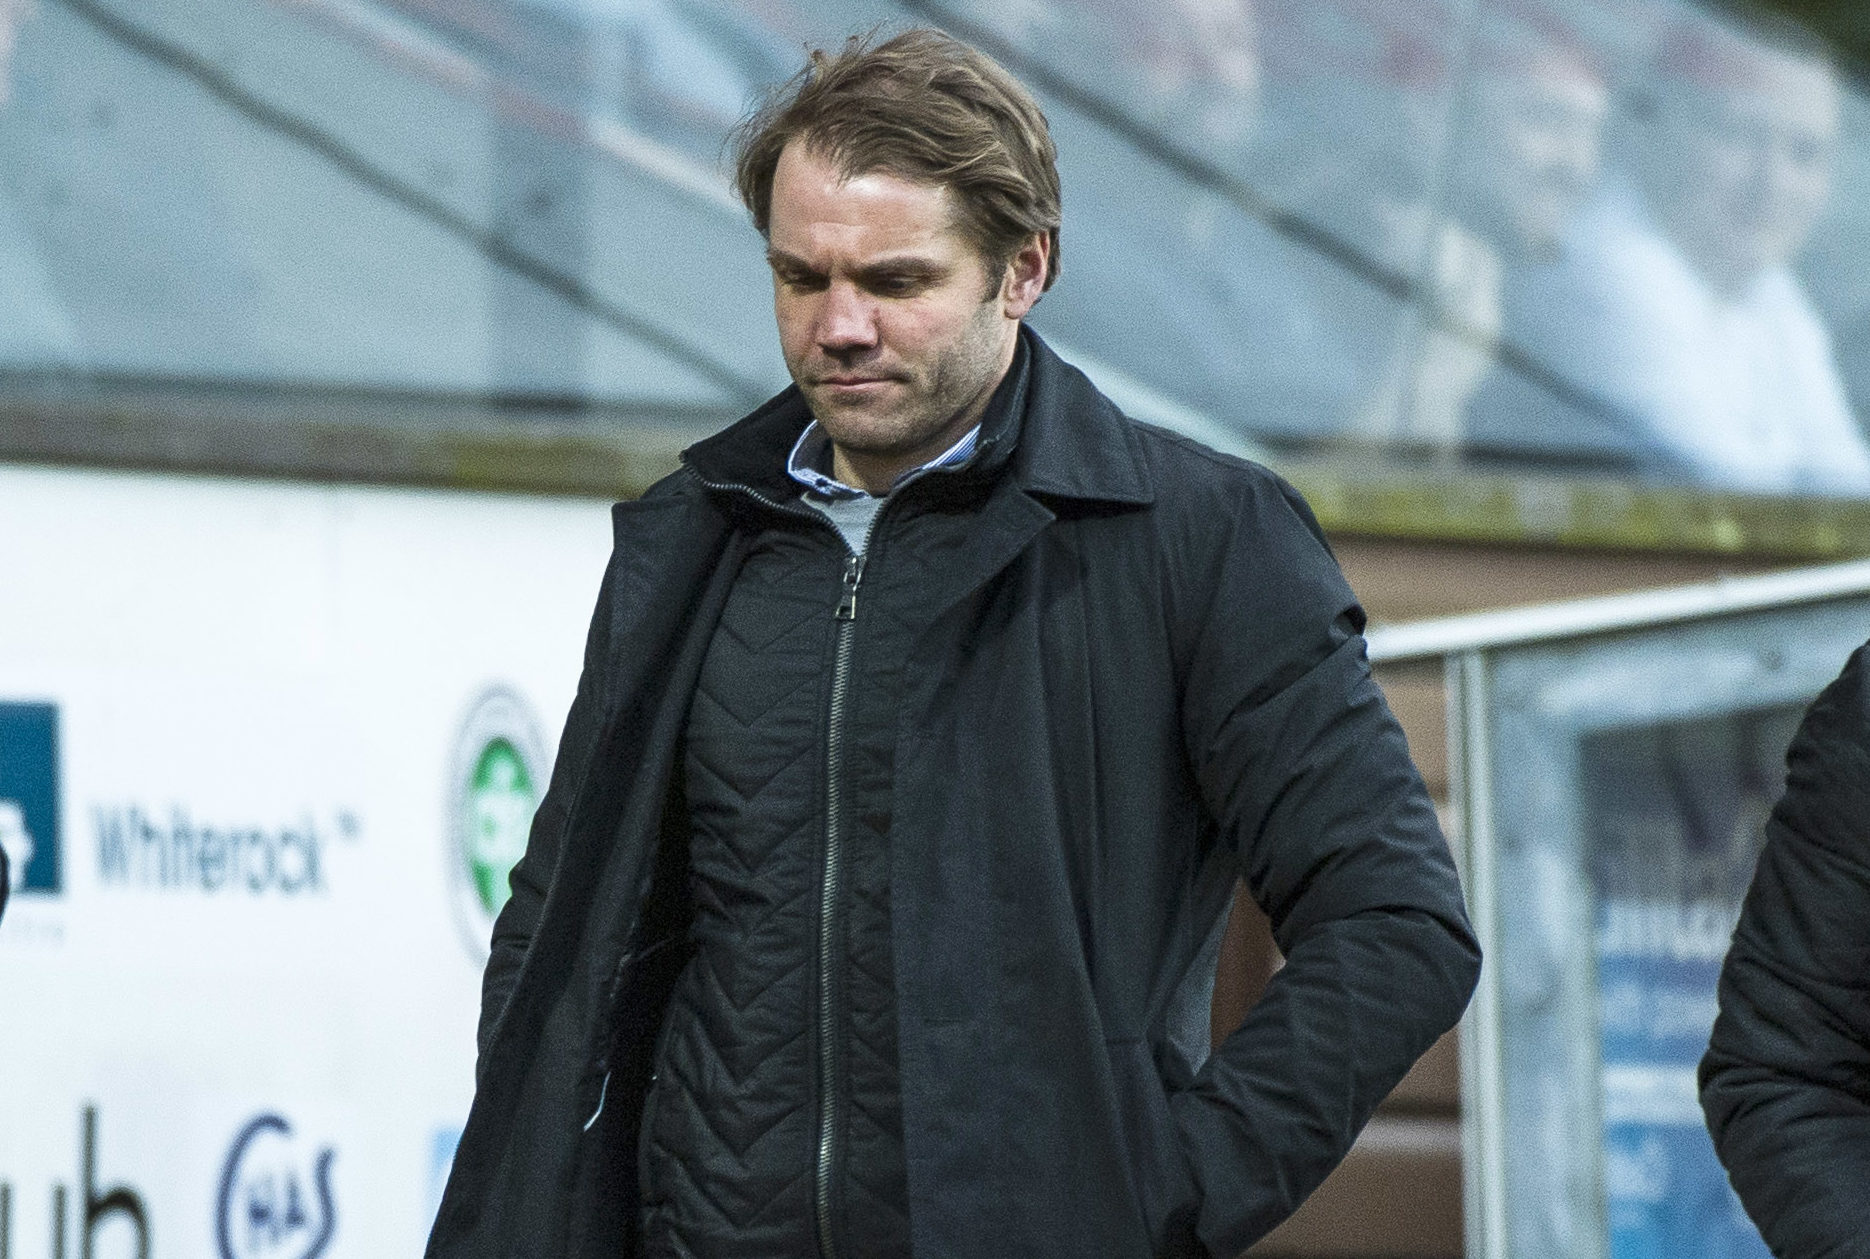 United boss Robbie Neilson after the Arbroath defeat.